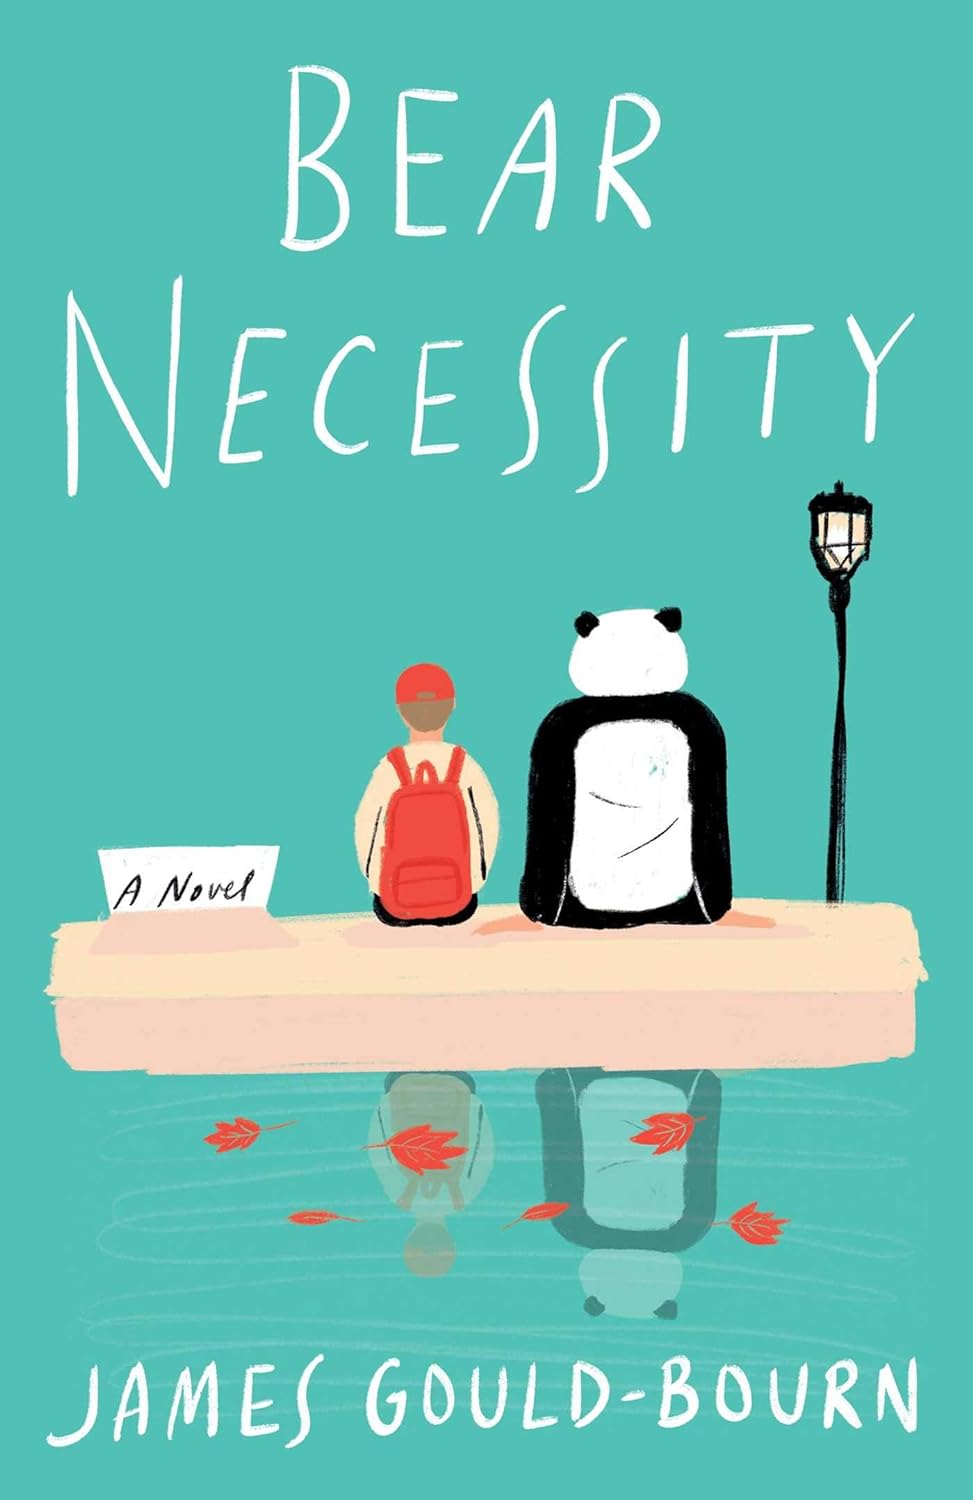 Book cover shows a child and a person in a bear suit sitting on a bench